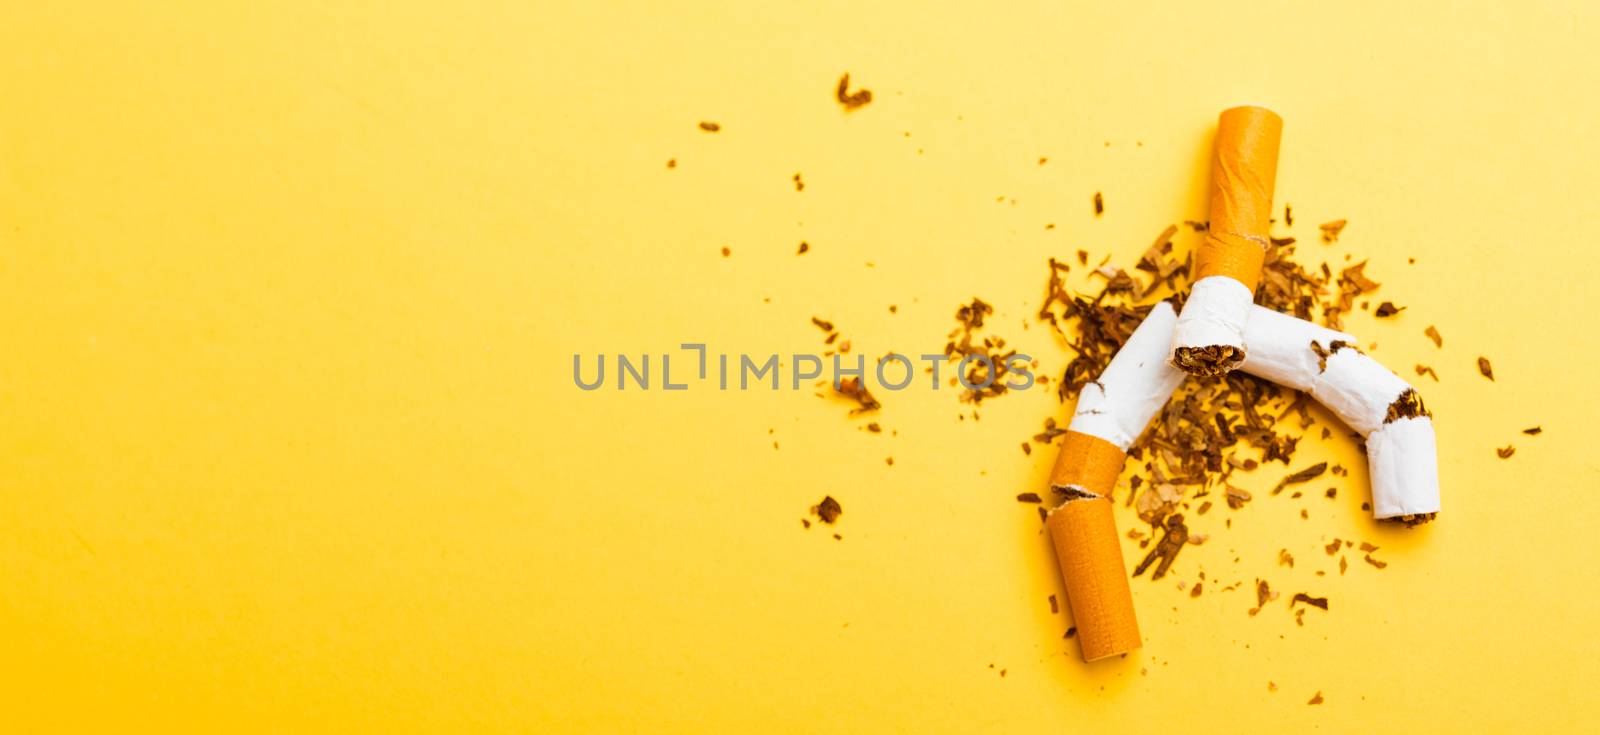 broken pile cigarette or tobacco on yellow background by Sorapop